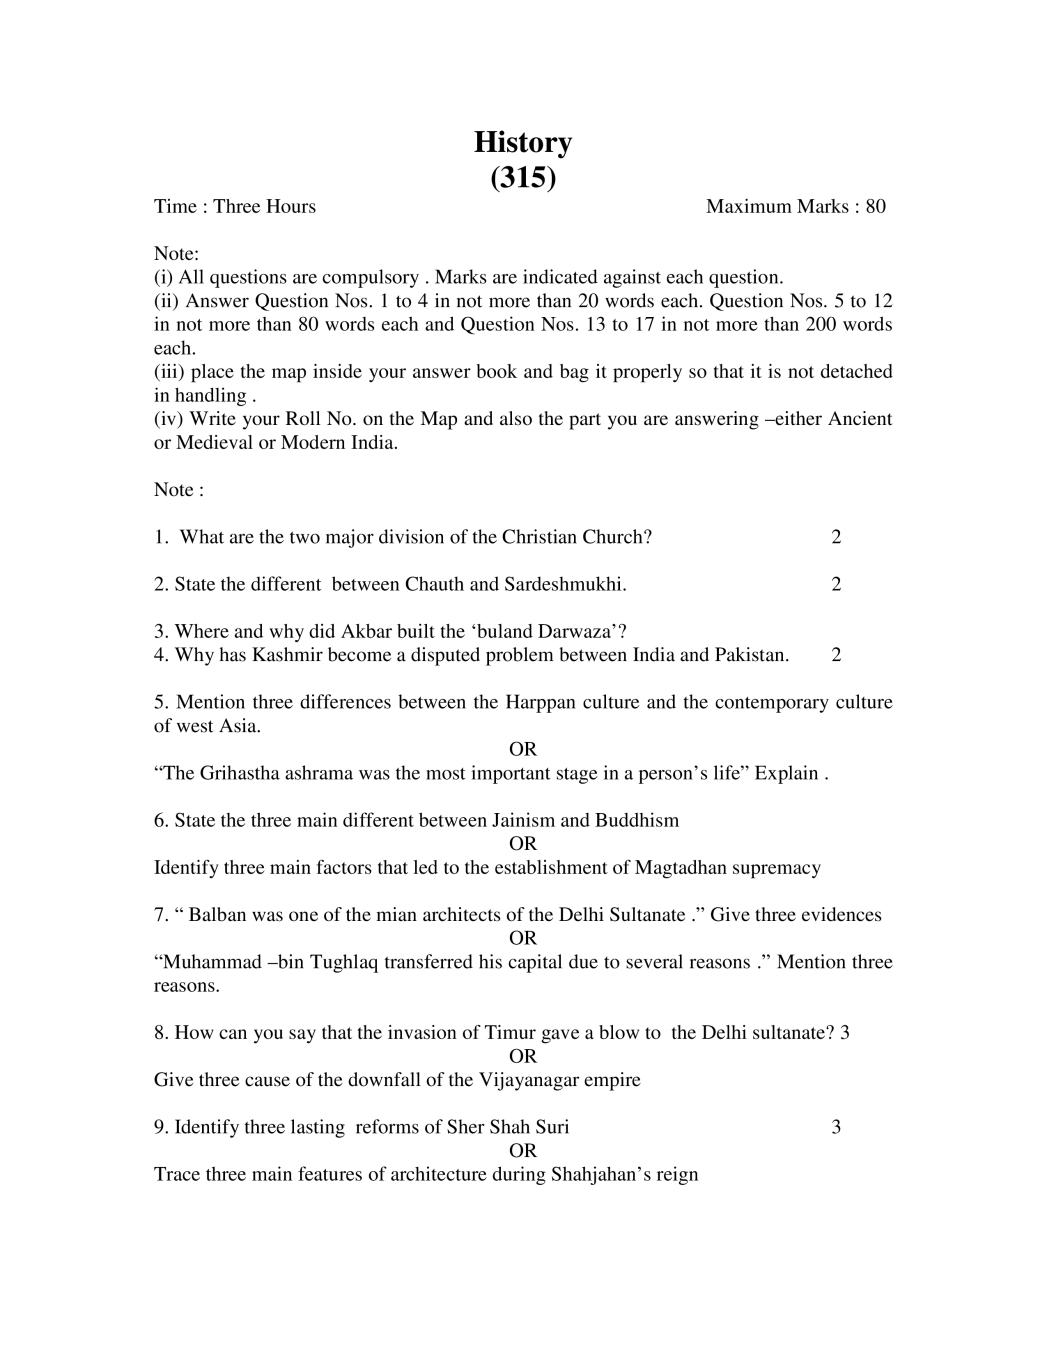 NIOS Class 12 Sample Paper 2020 - History - Page 1